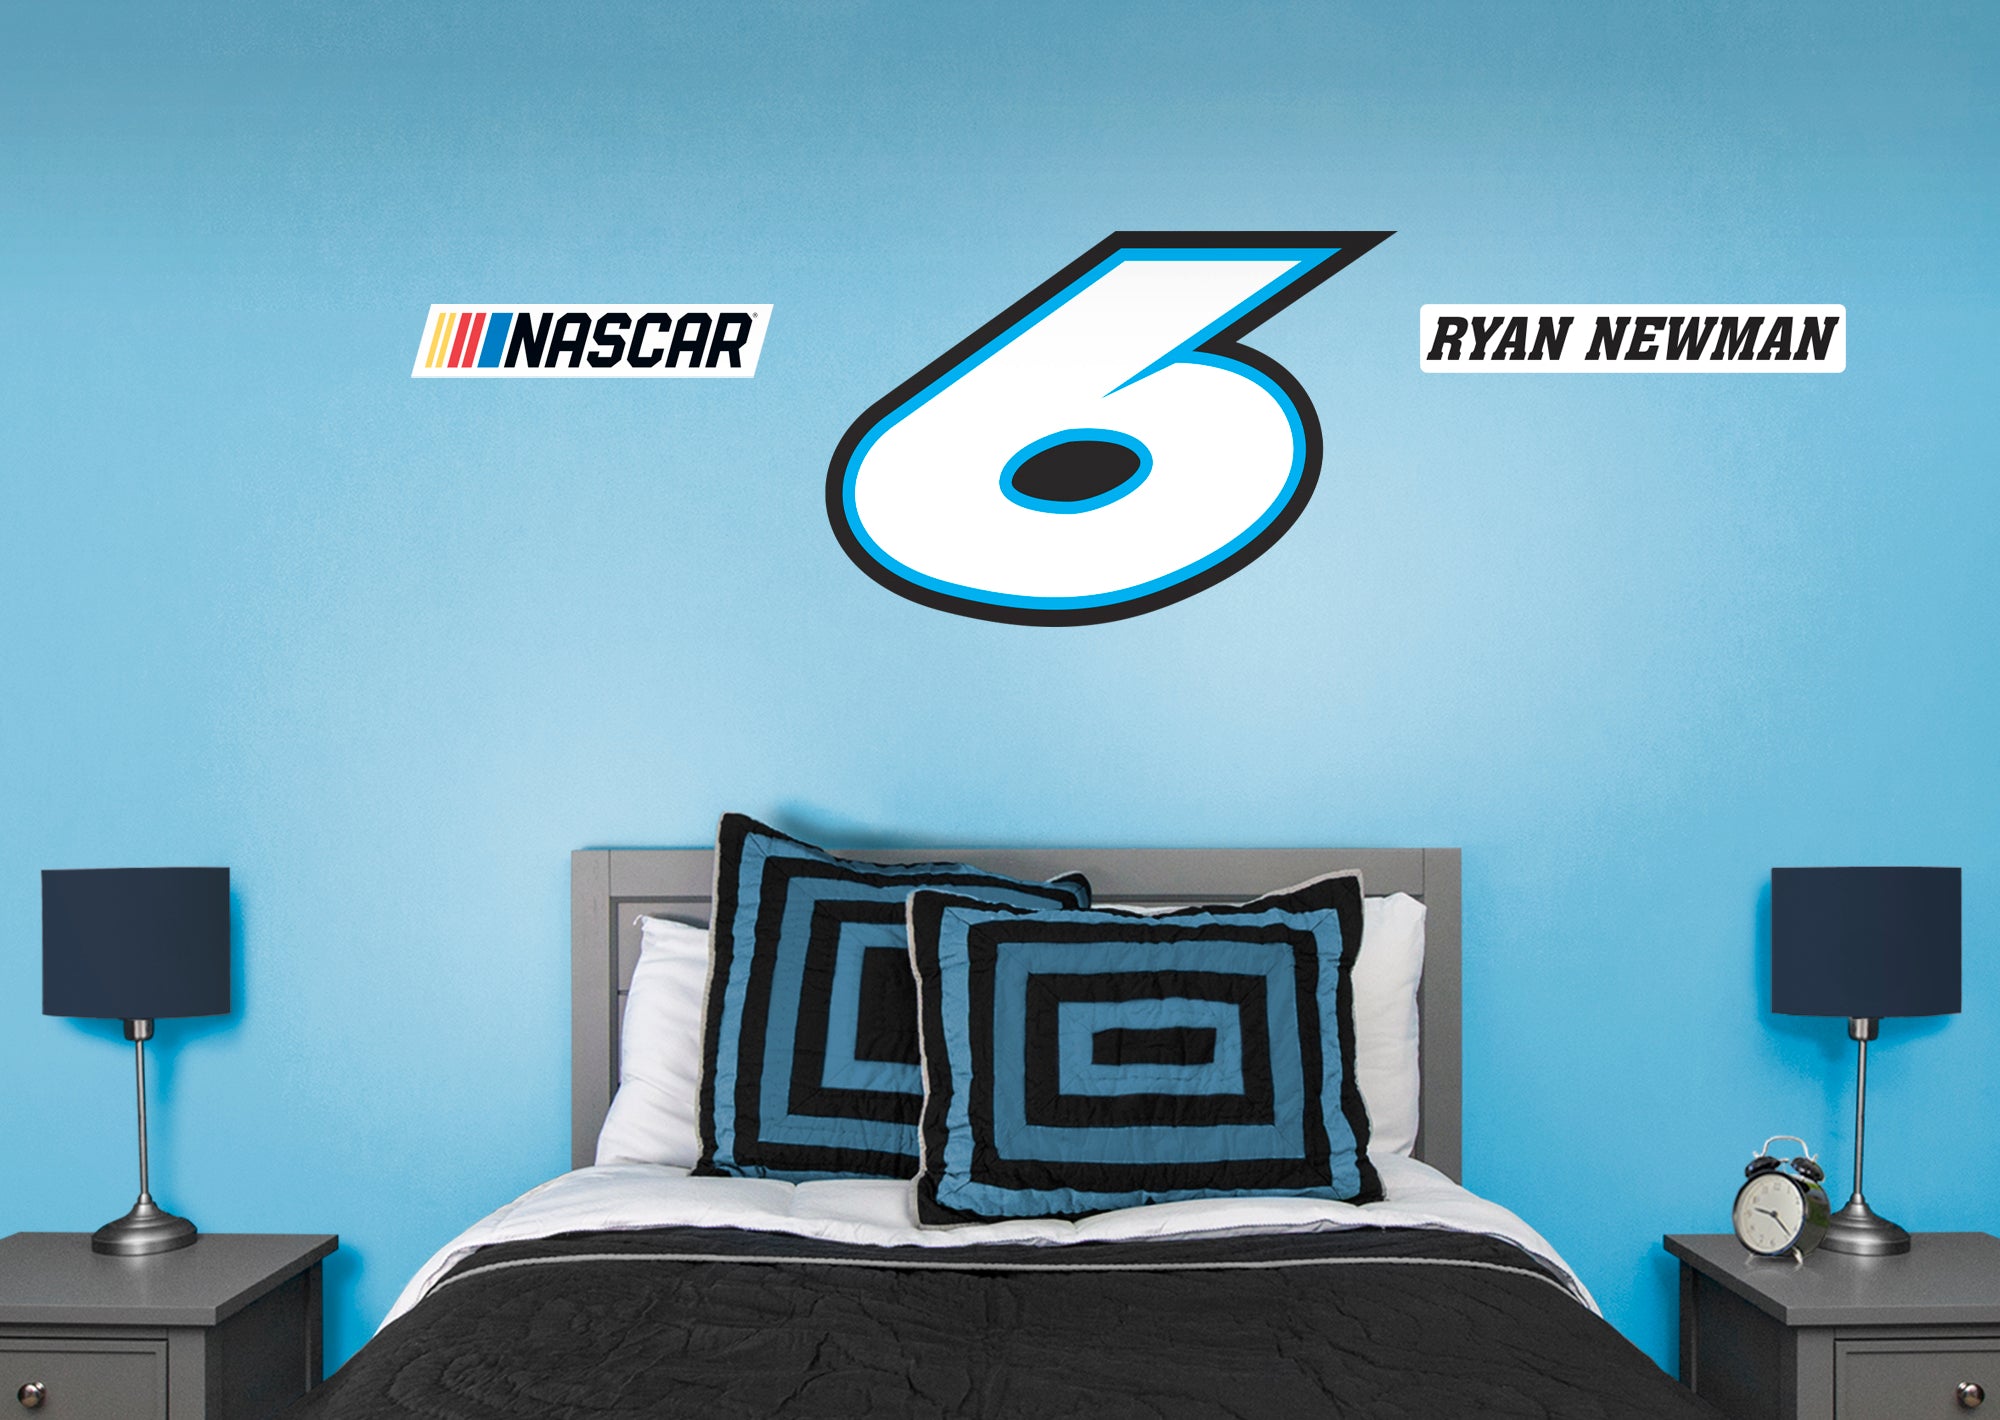 Ryan Newman 2021 #6 Logo - Officially Licensed NASCAR Removable Wall Decal XL by Fathead | Vinyl